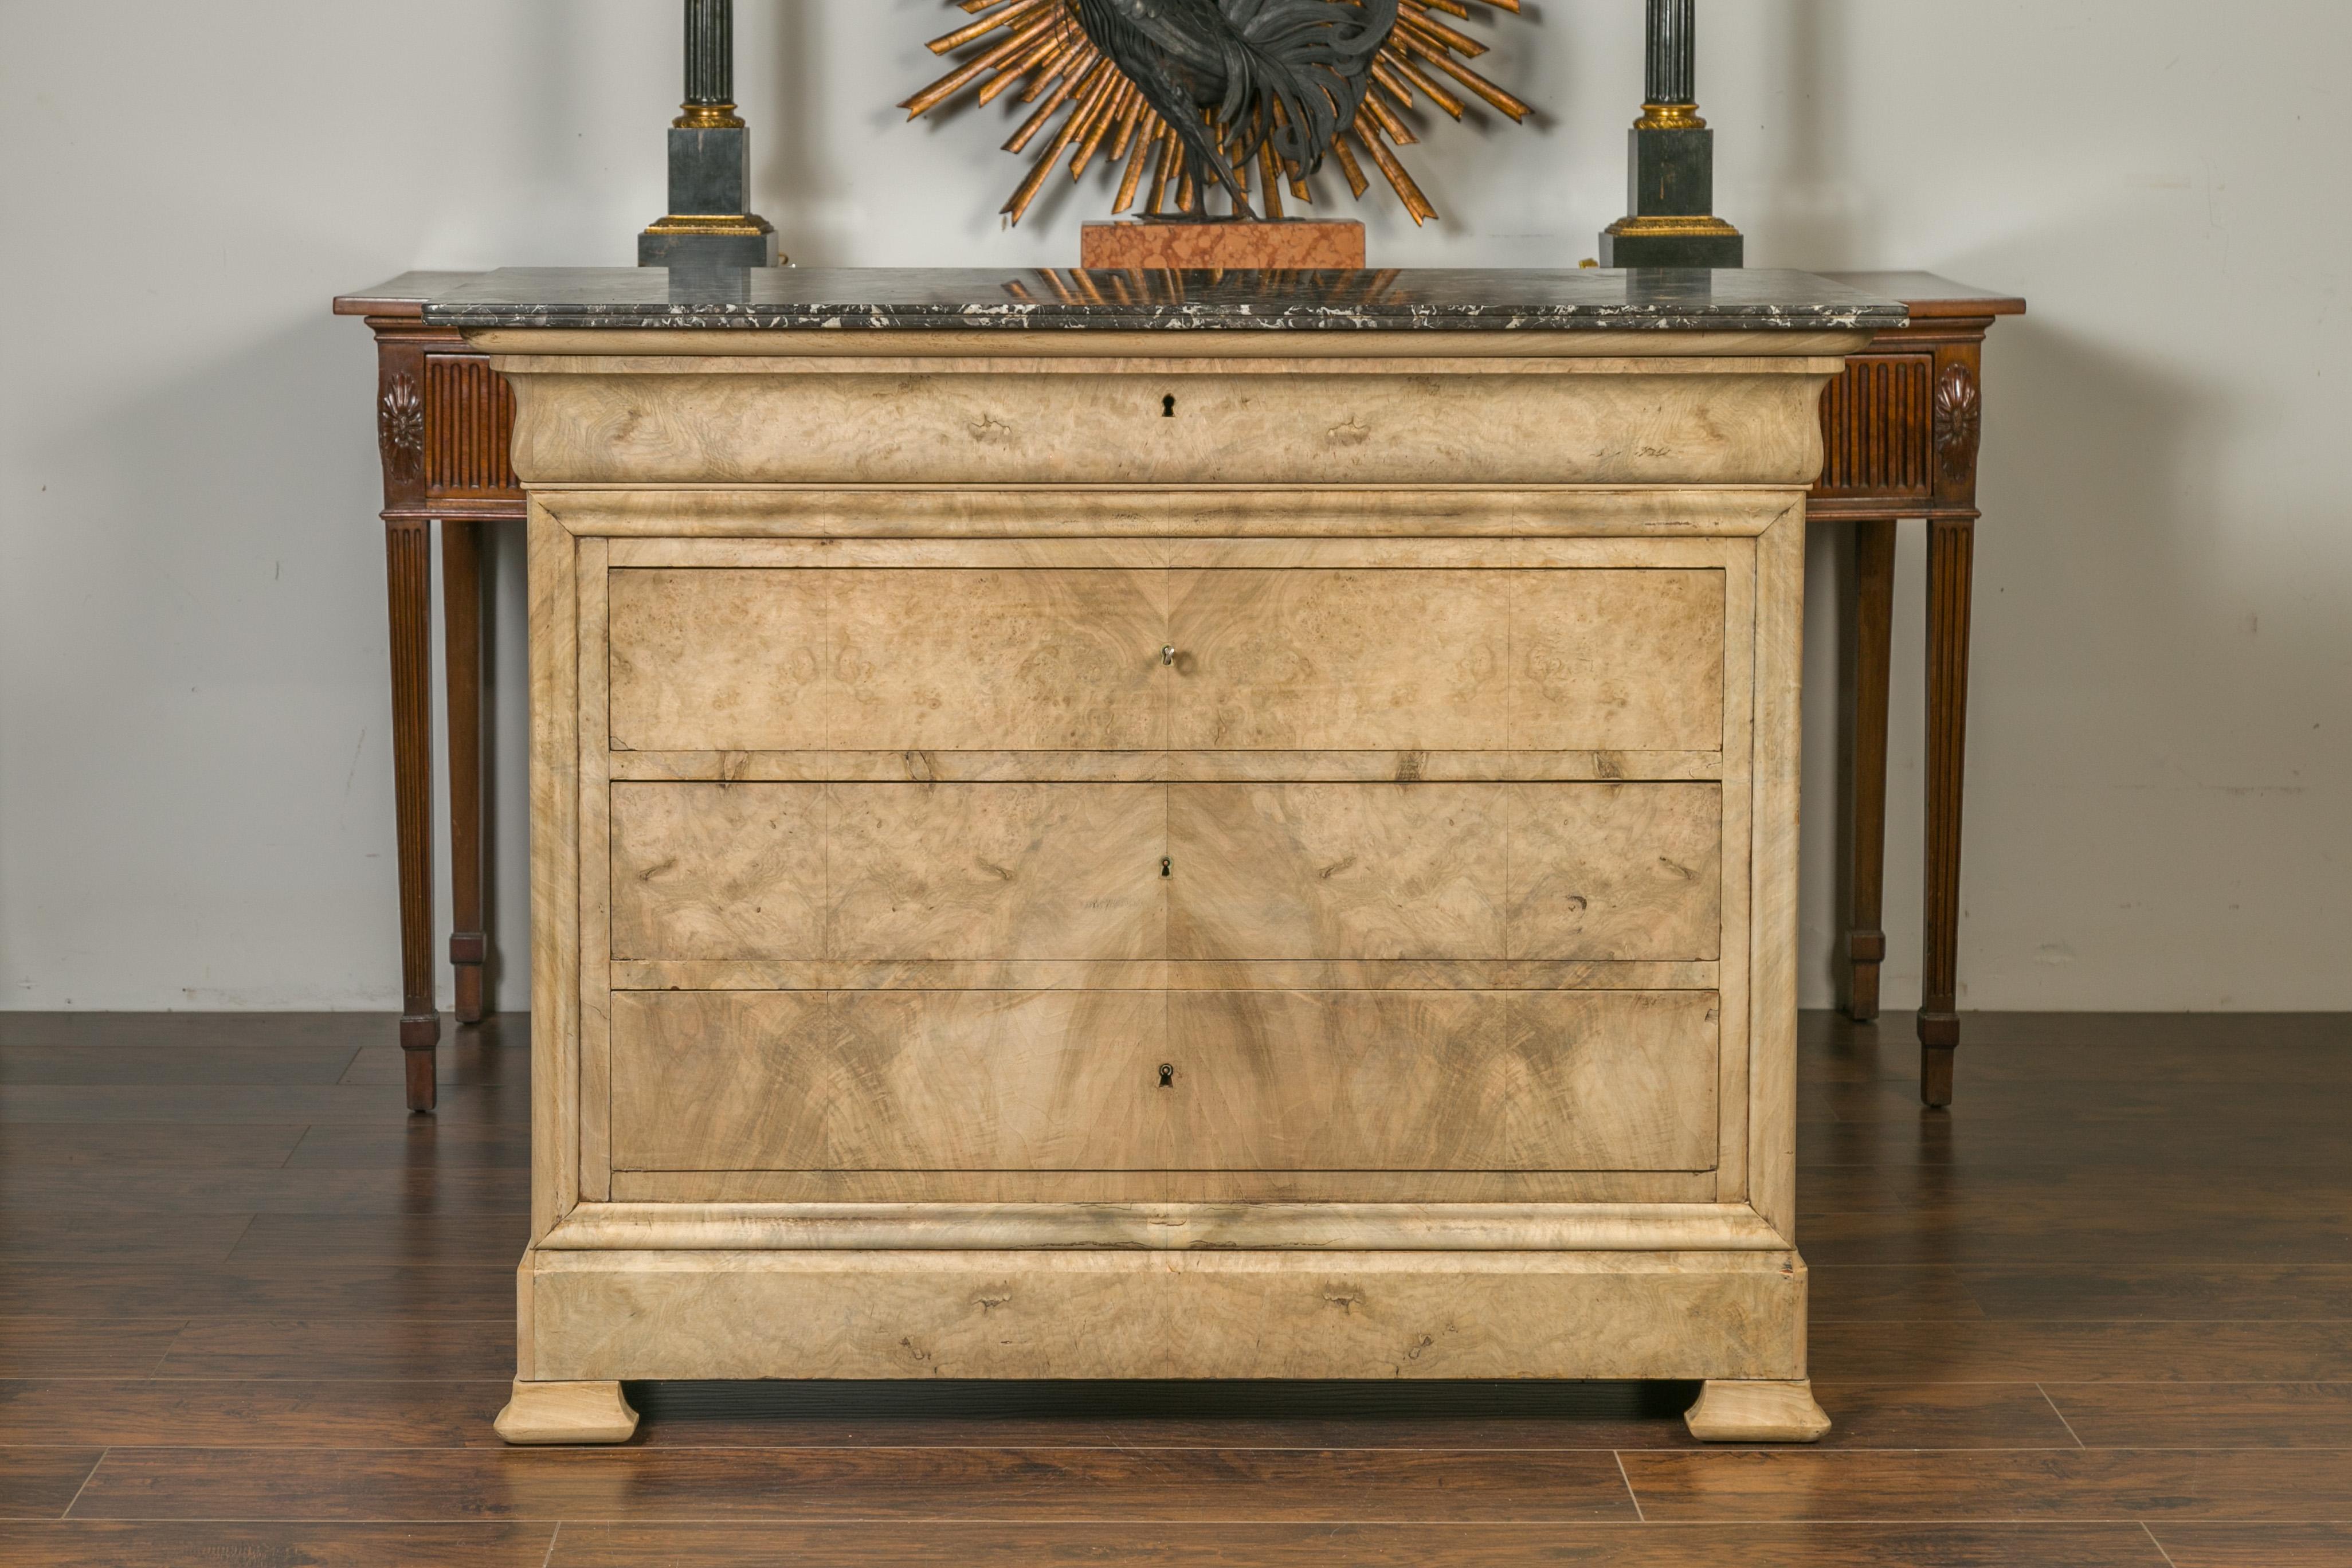 A French Louis-Philippe style bleached burl wood commode from the late 19th century, with grey marble top and four drawers. Born in France during the third quarter of the 19th century, this Louis-Philippe commode features a rectangular variegated